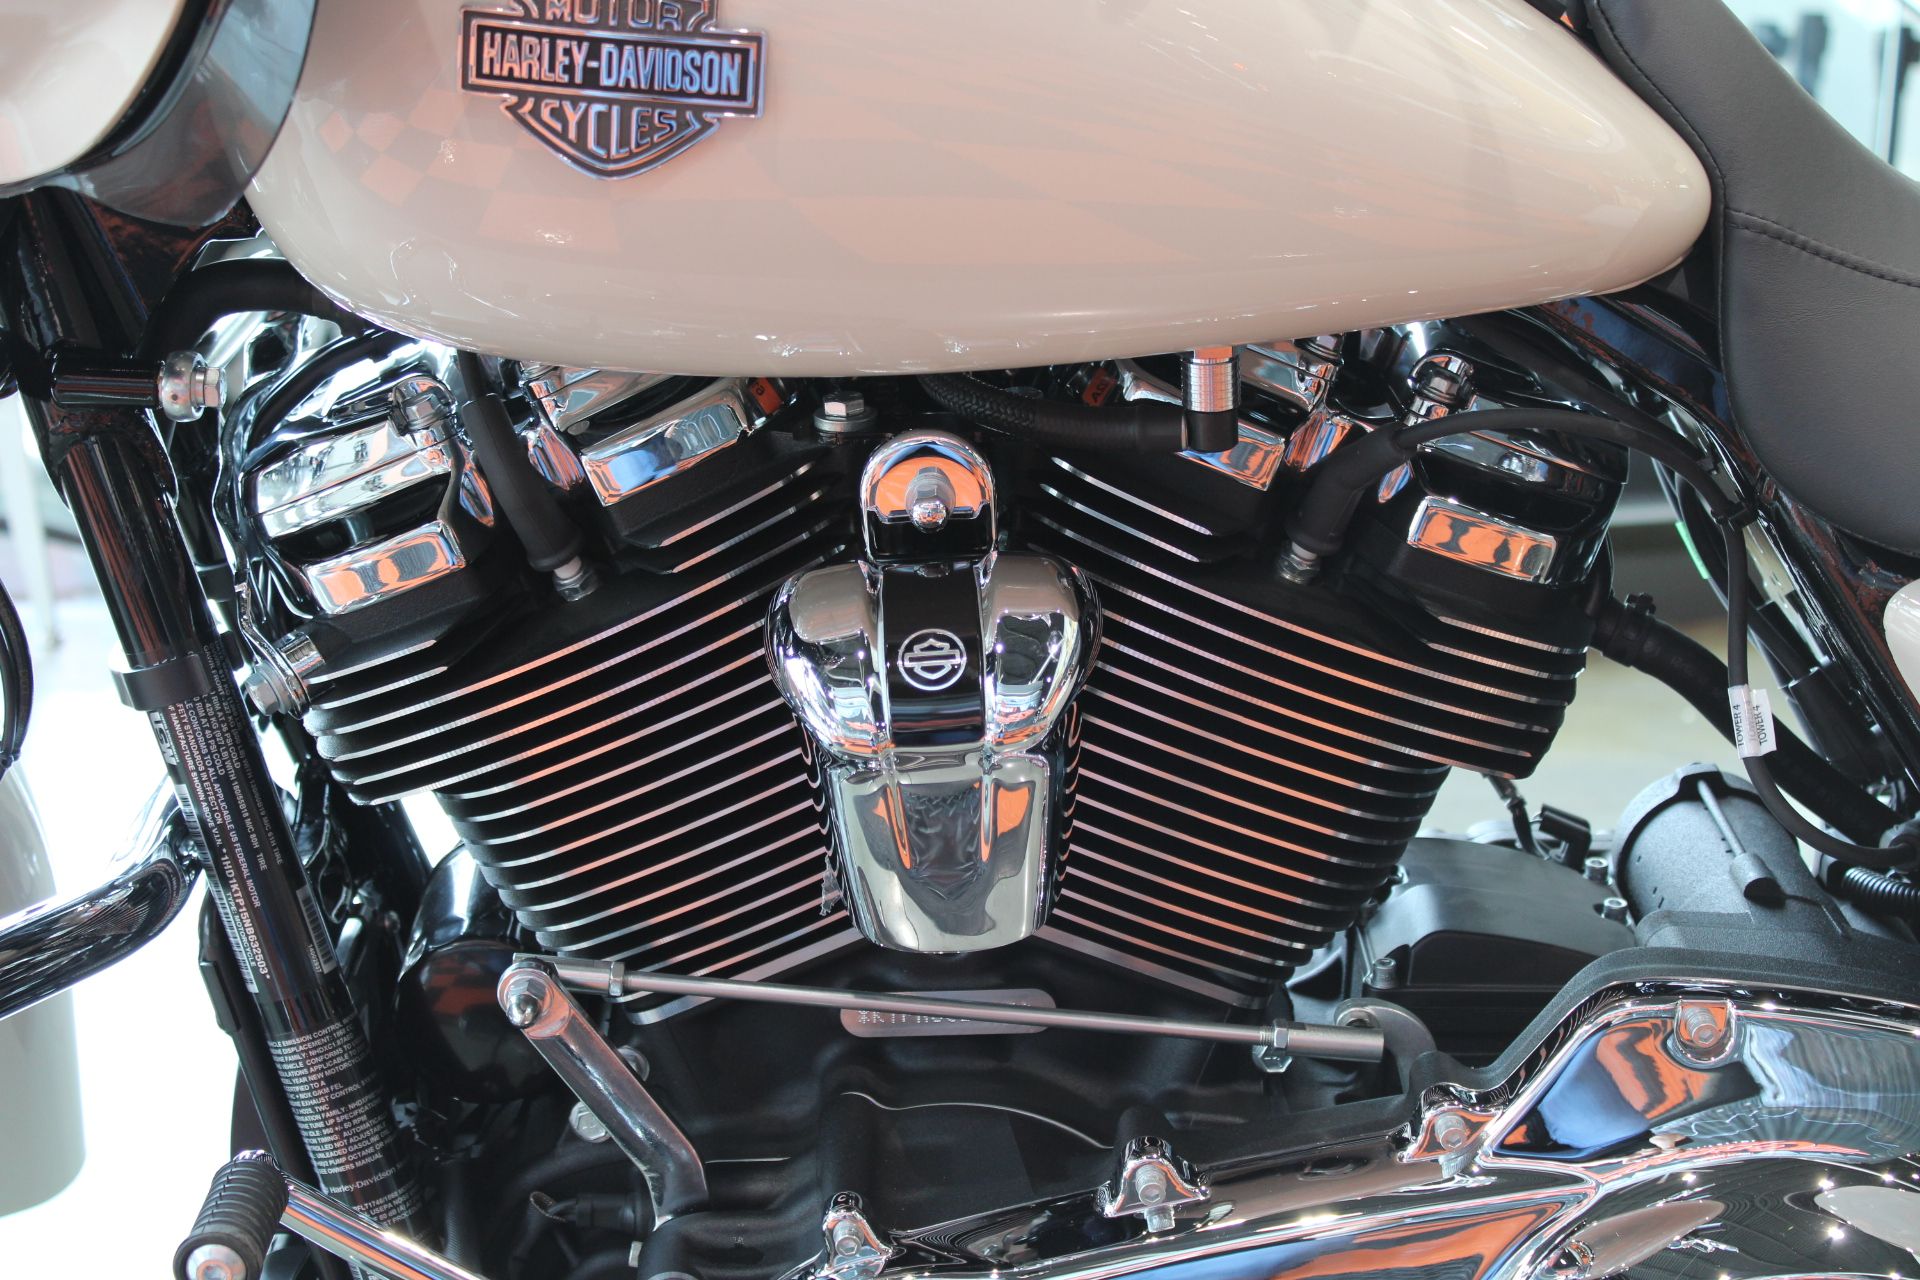 2022 Harley-Davidson Road Glide® Special in Shorewood, Illinois - Photo 15